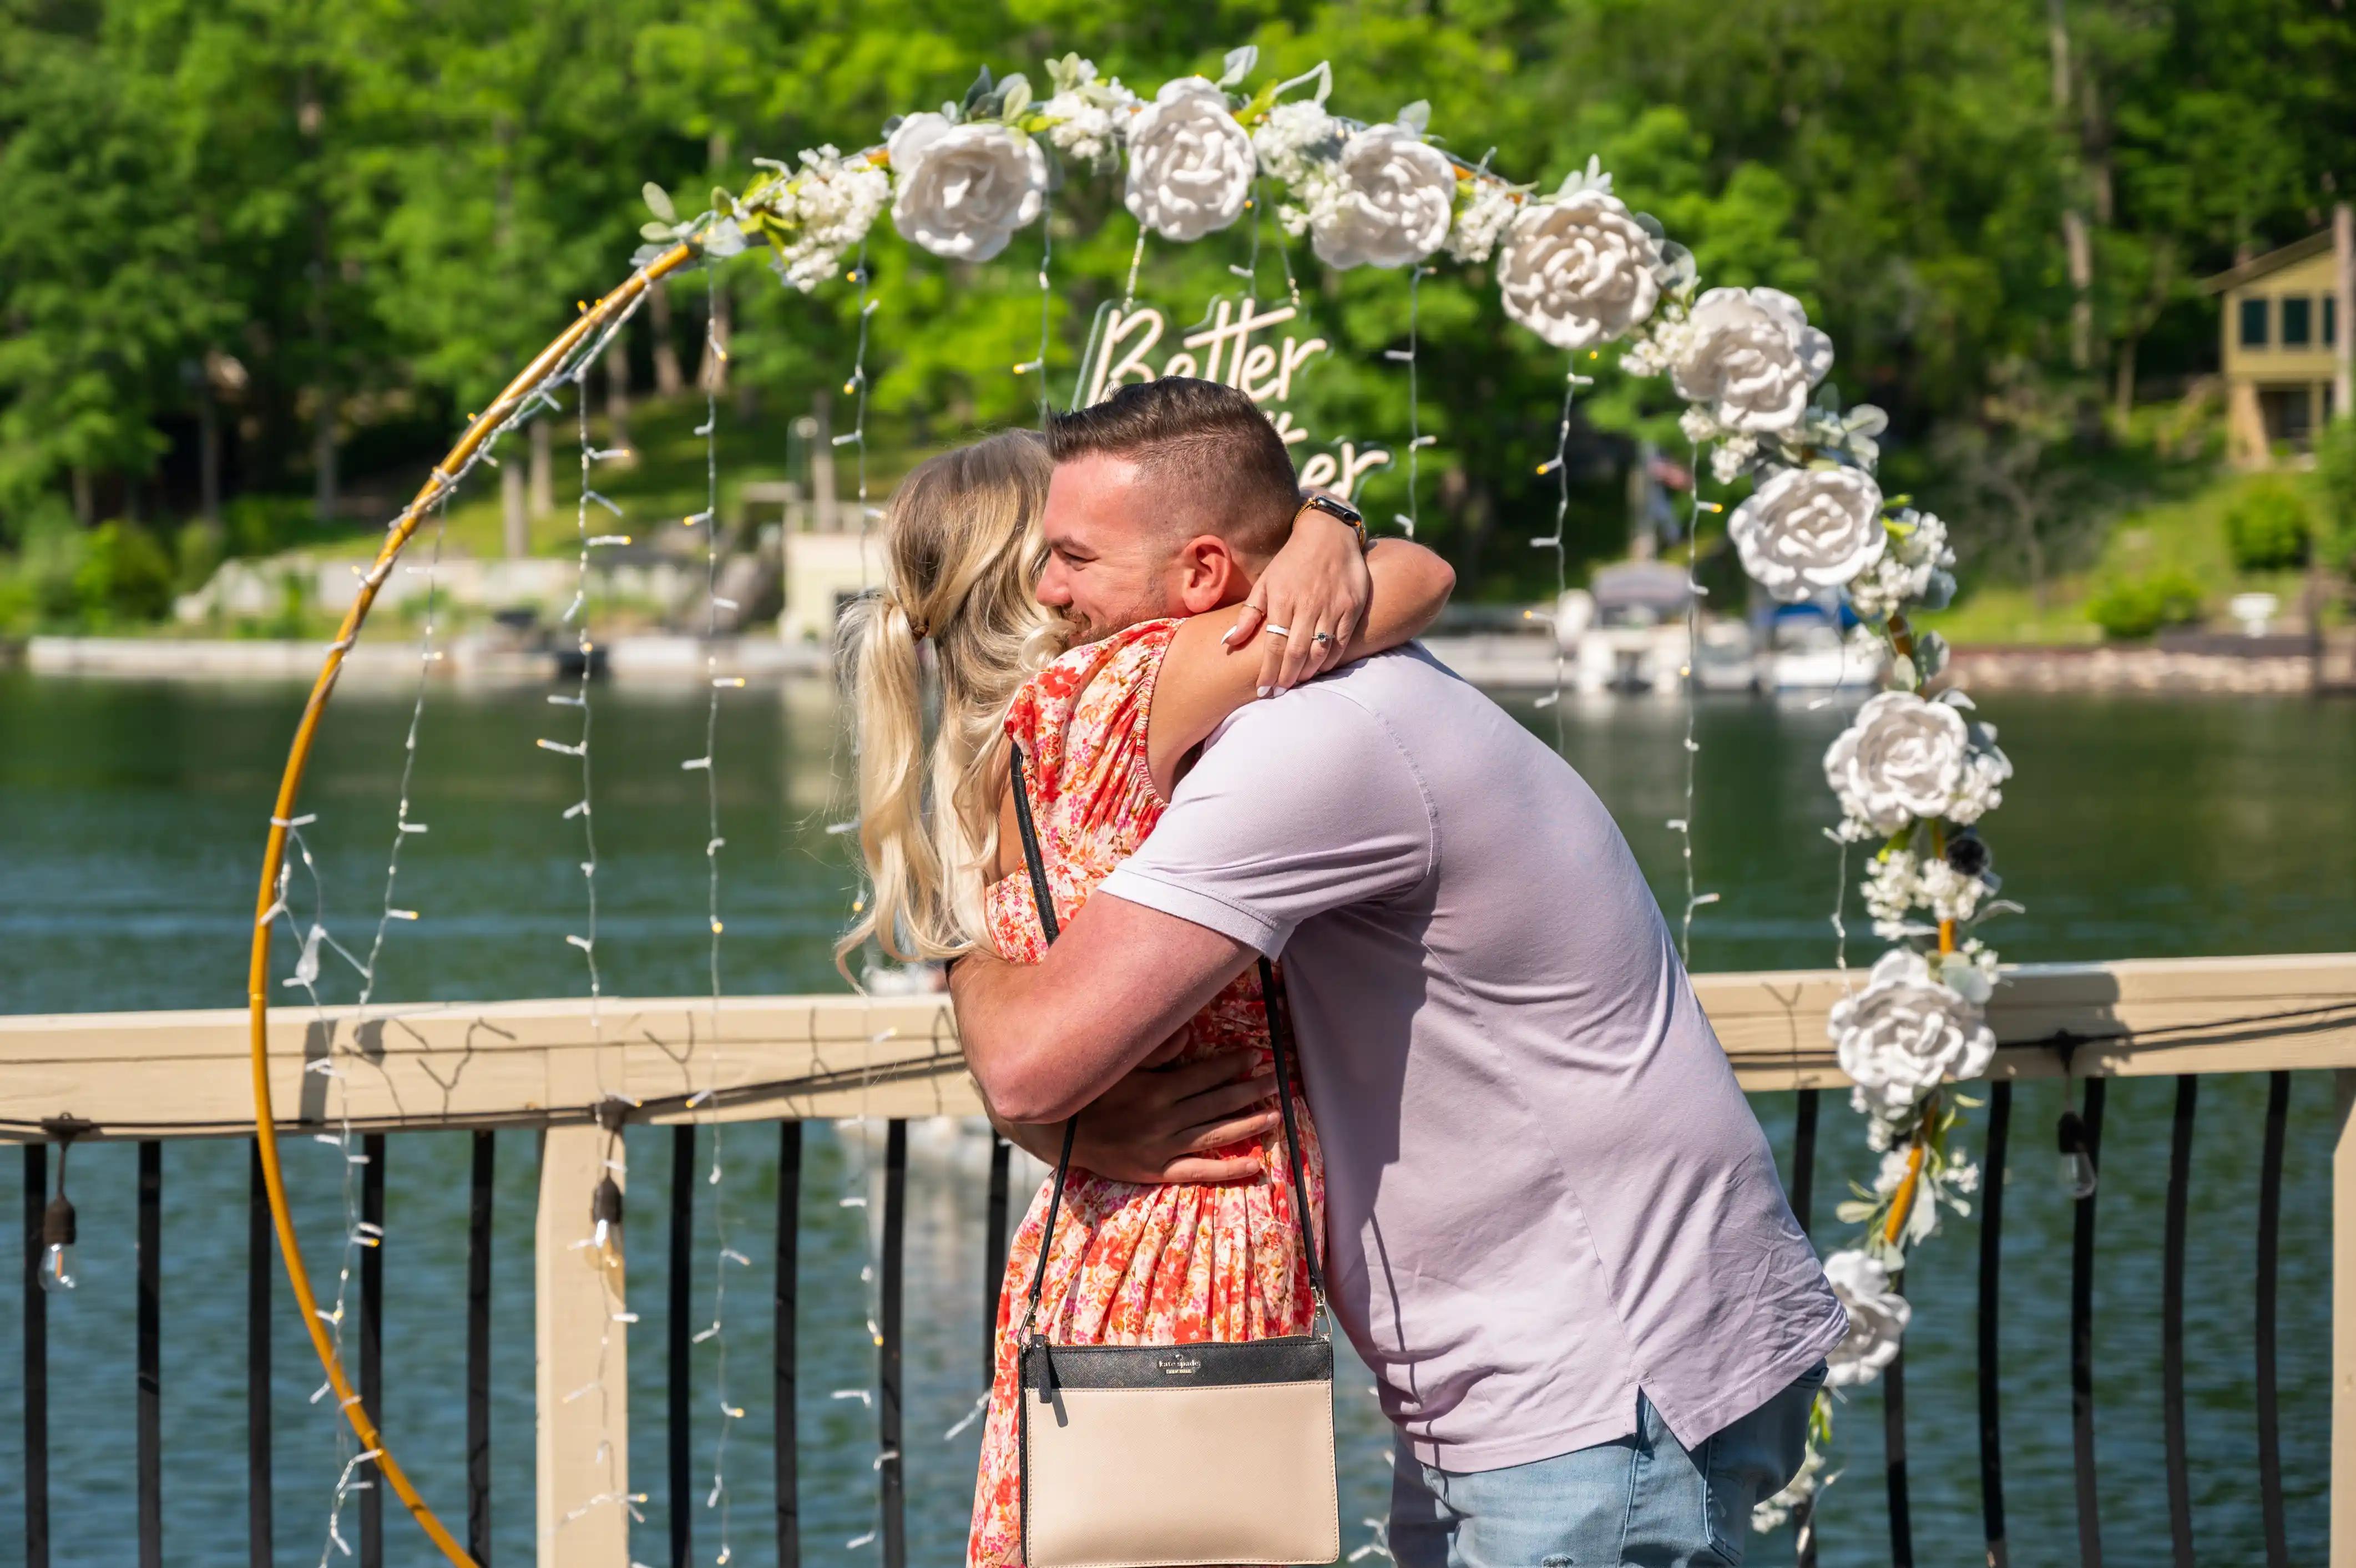 Couple embracing under a floral arch by a lakeside with boats in the background.